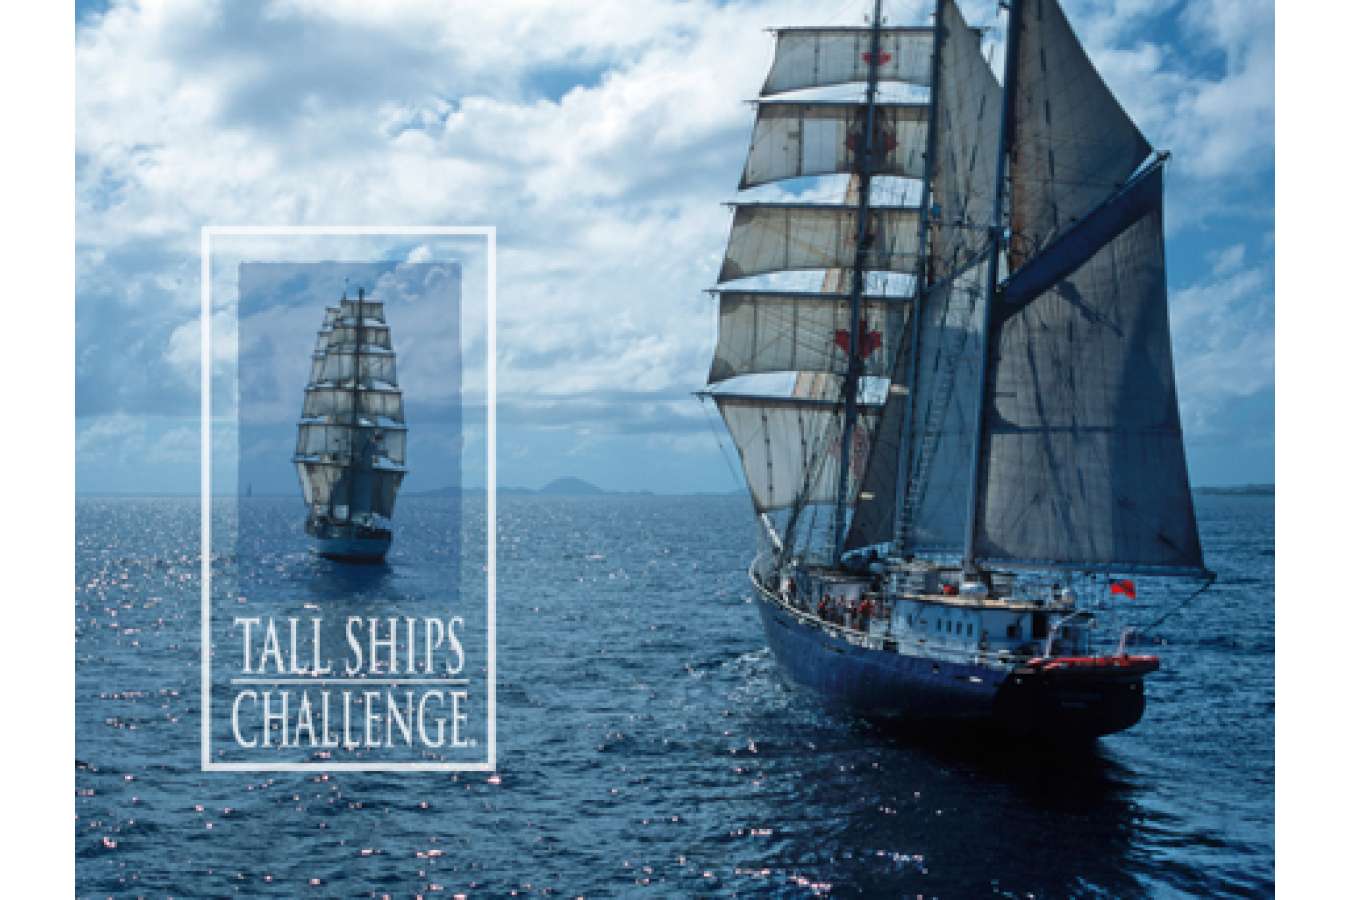 Asta 1 PREVP ship logos : ASTA Tall Ship Challenge is a series of sail training races in North America